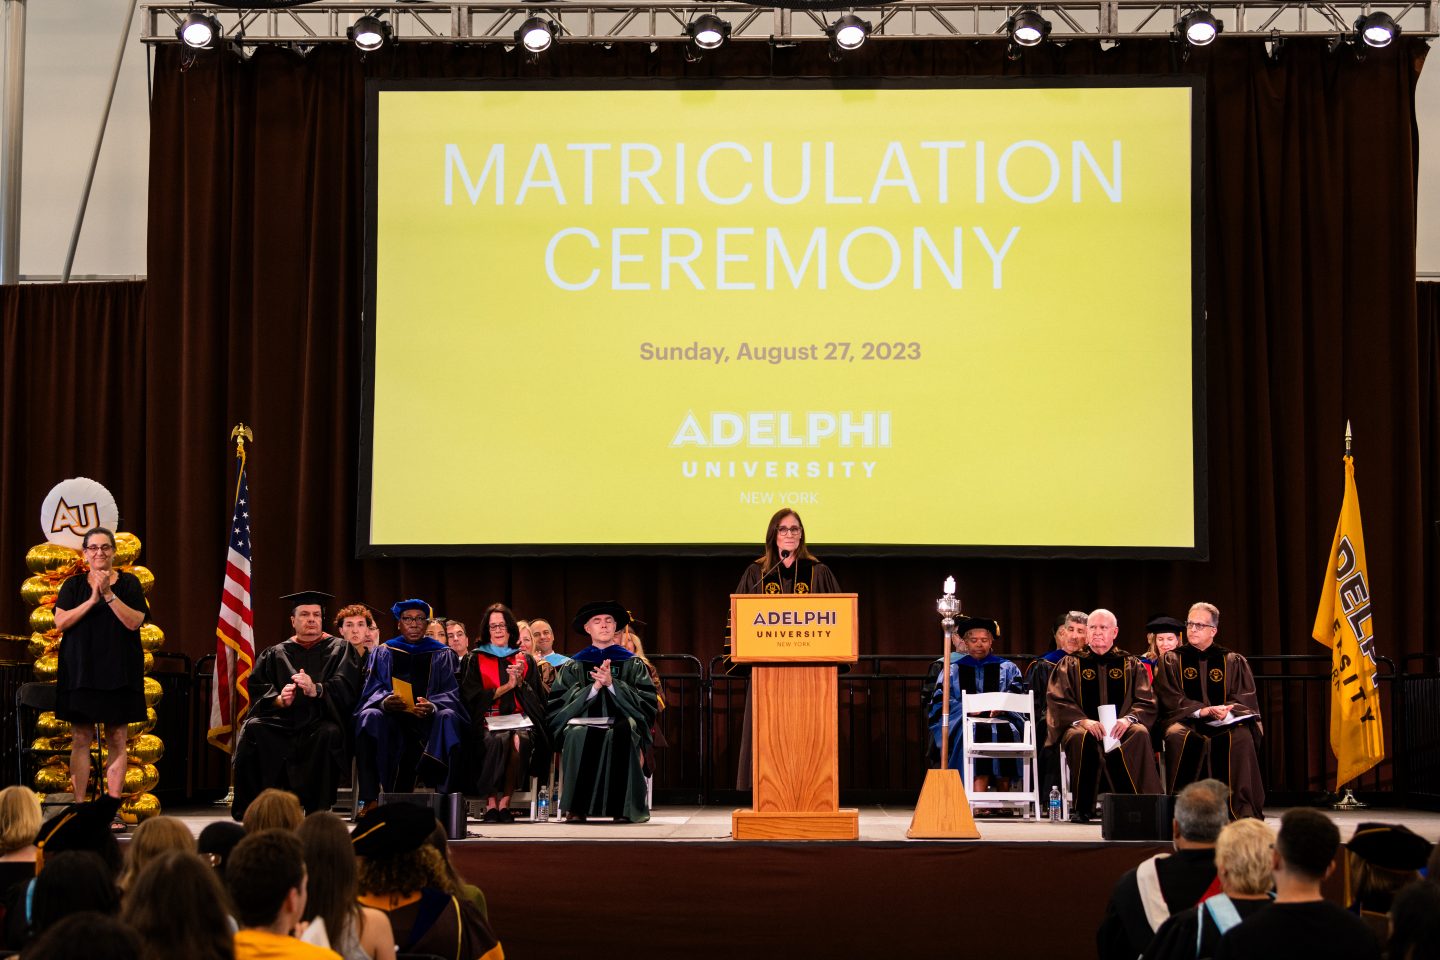 Academic officials seated on a stage at a matriculation ceremony with a female speaker at a podium, a large screen with text behind her, and university banners "AU" and "Adelphi" to the speaker’s left and right. Text in the Image: The large screen in the background displays the following text: Matriculation Ceremony, Sunday, August 27, 2023, Adelphi University, New York